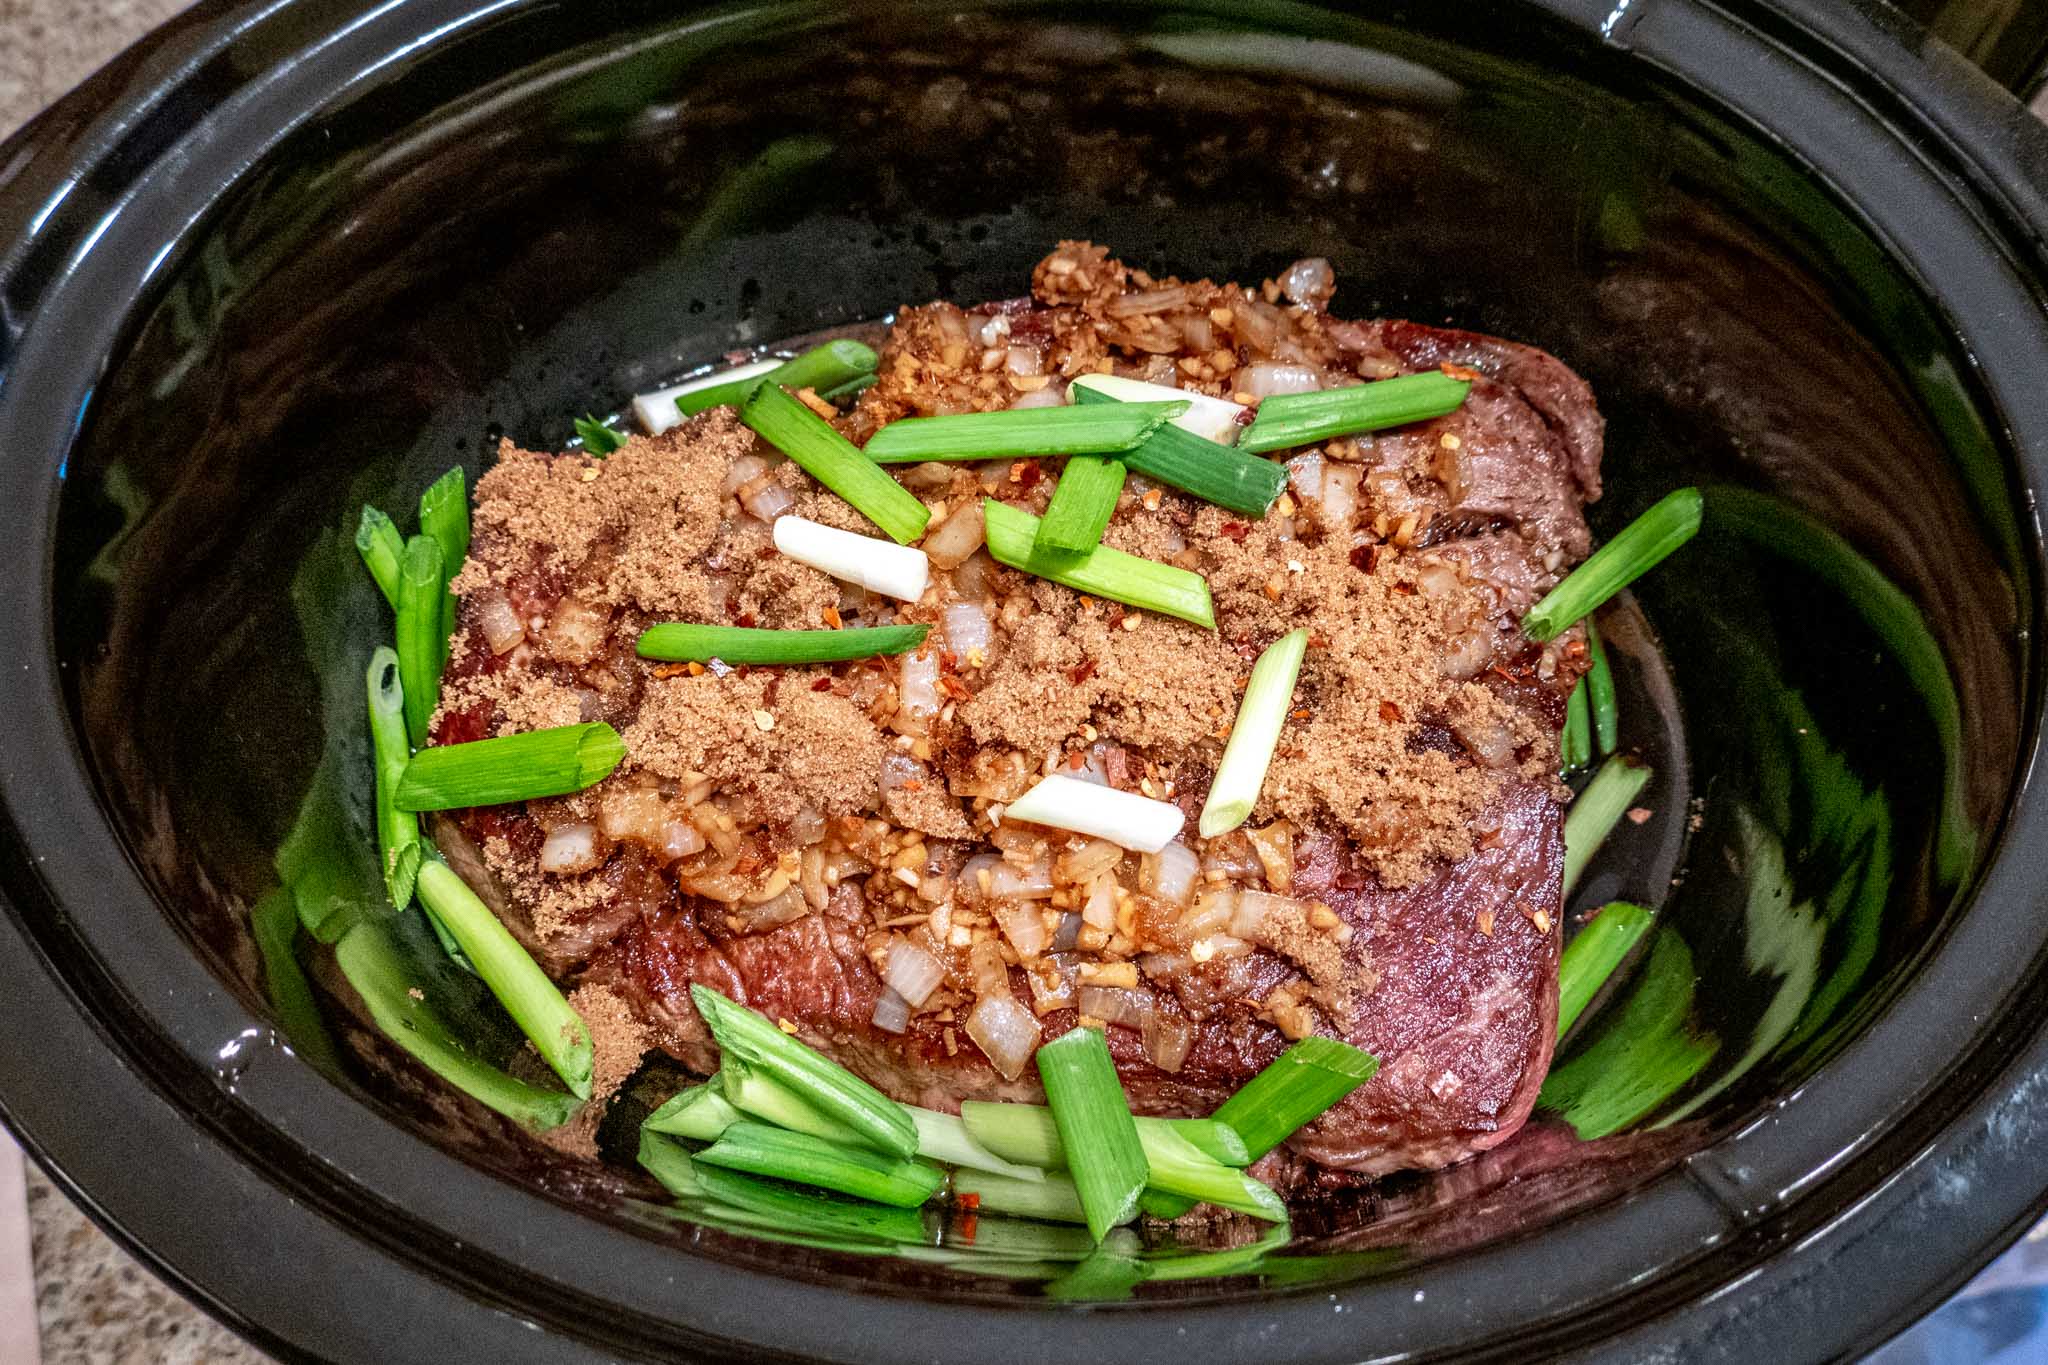 Beef with brown sugar, scallions, and other ingredients in slow cooker